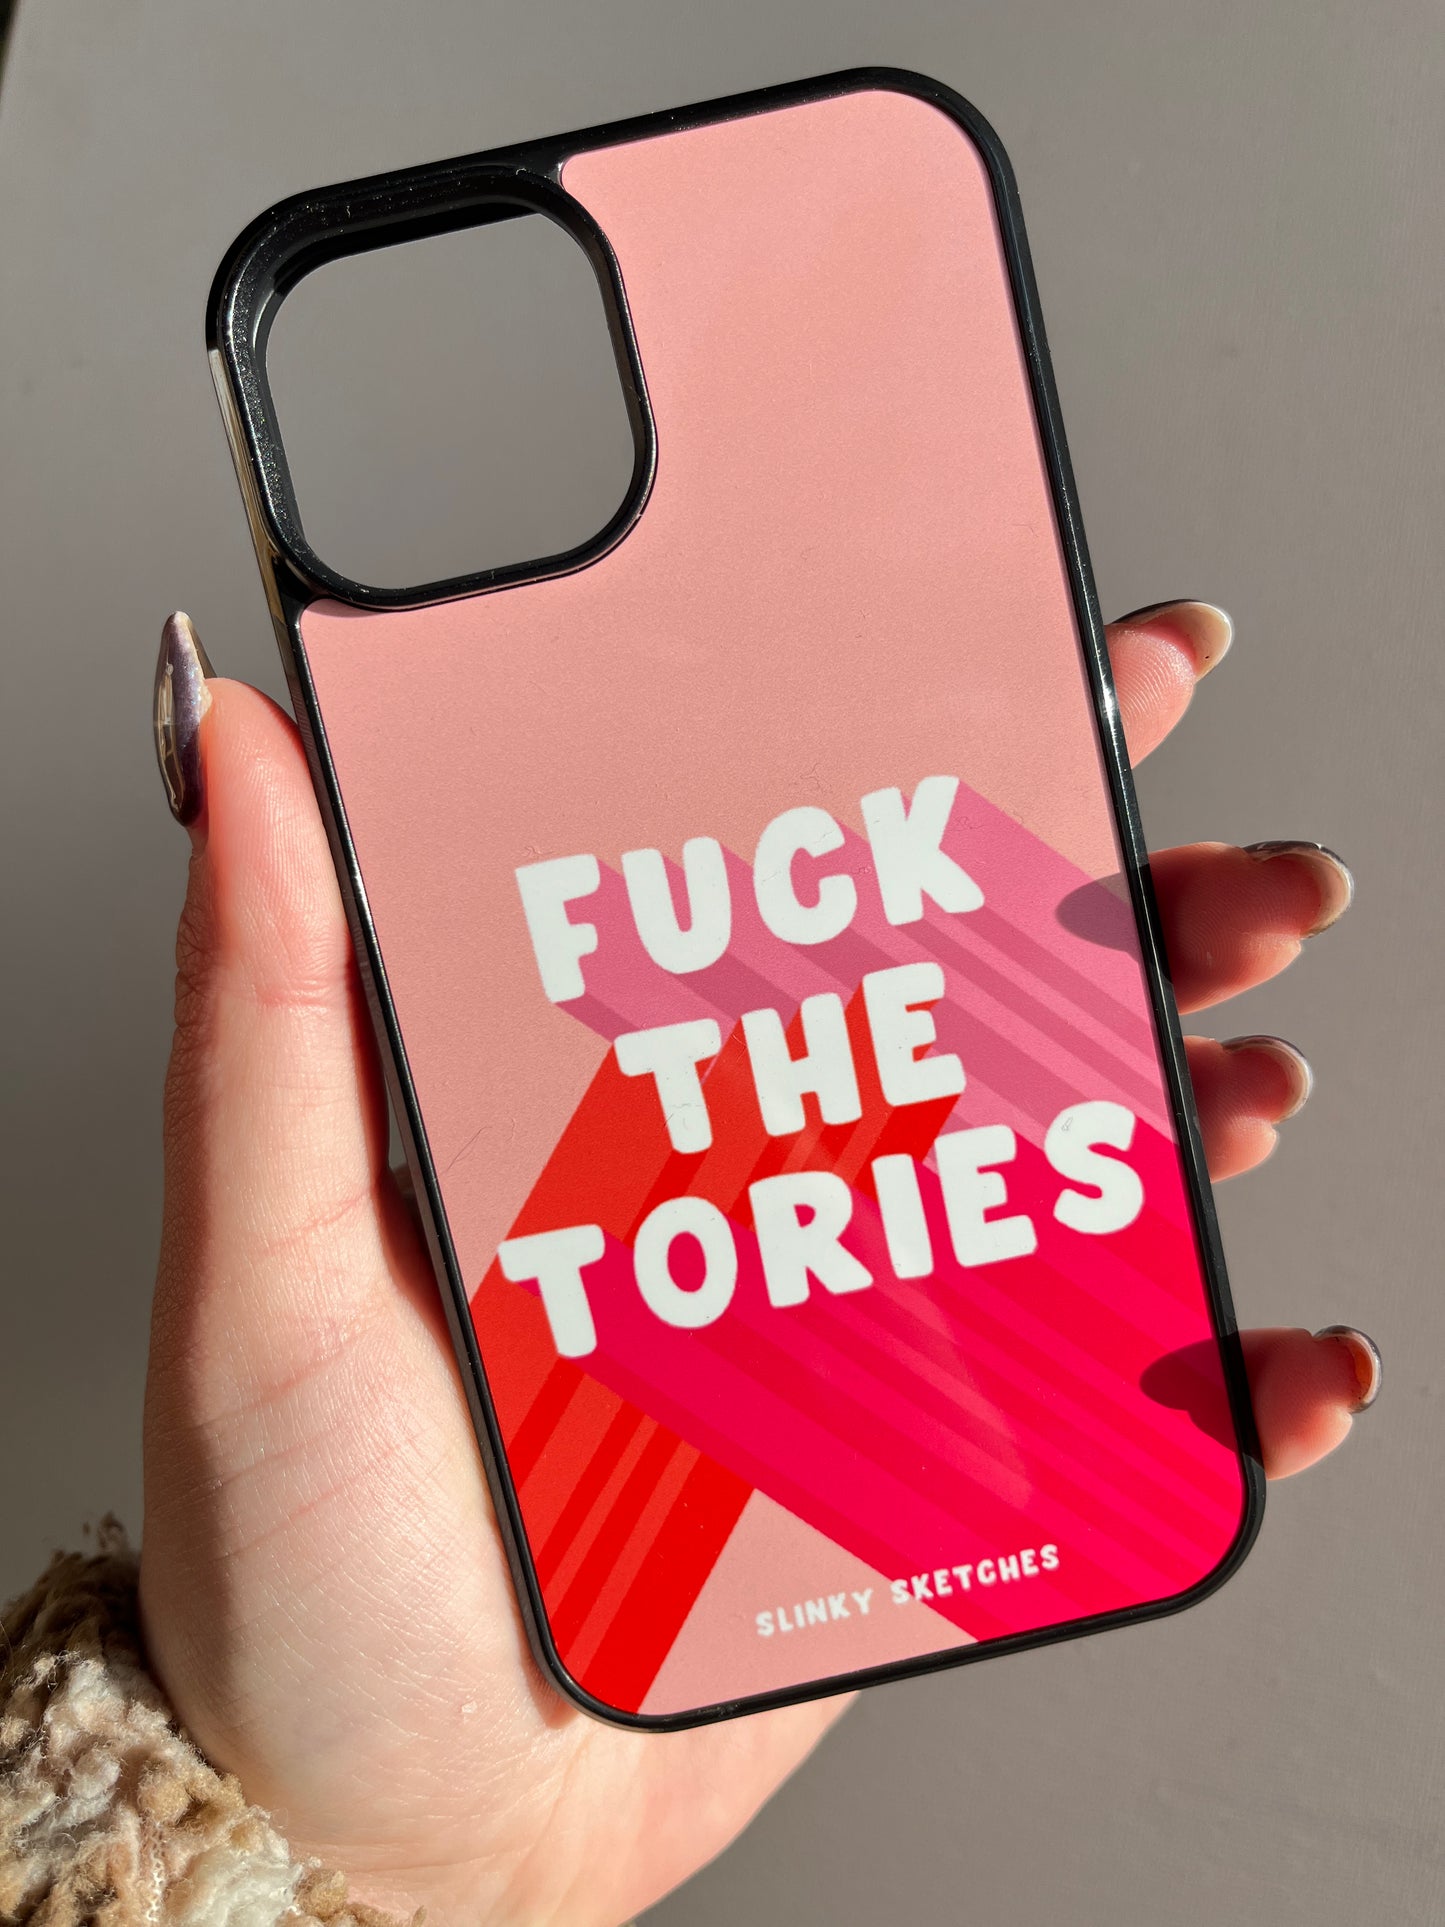 Fuck the Tories Phone Case